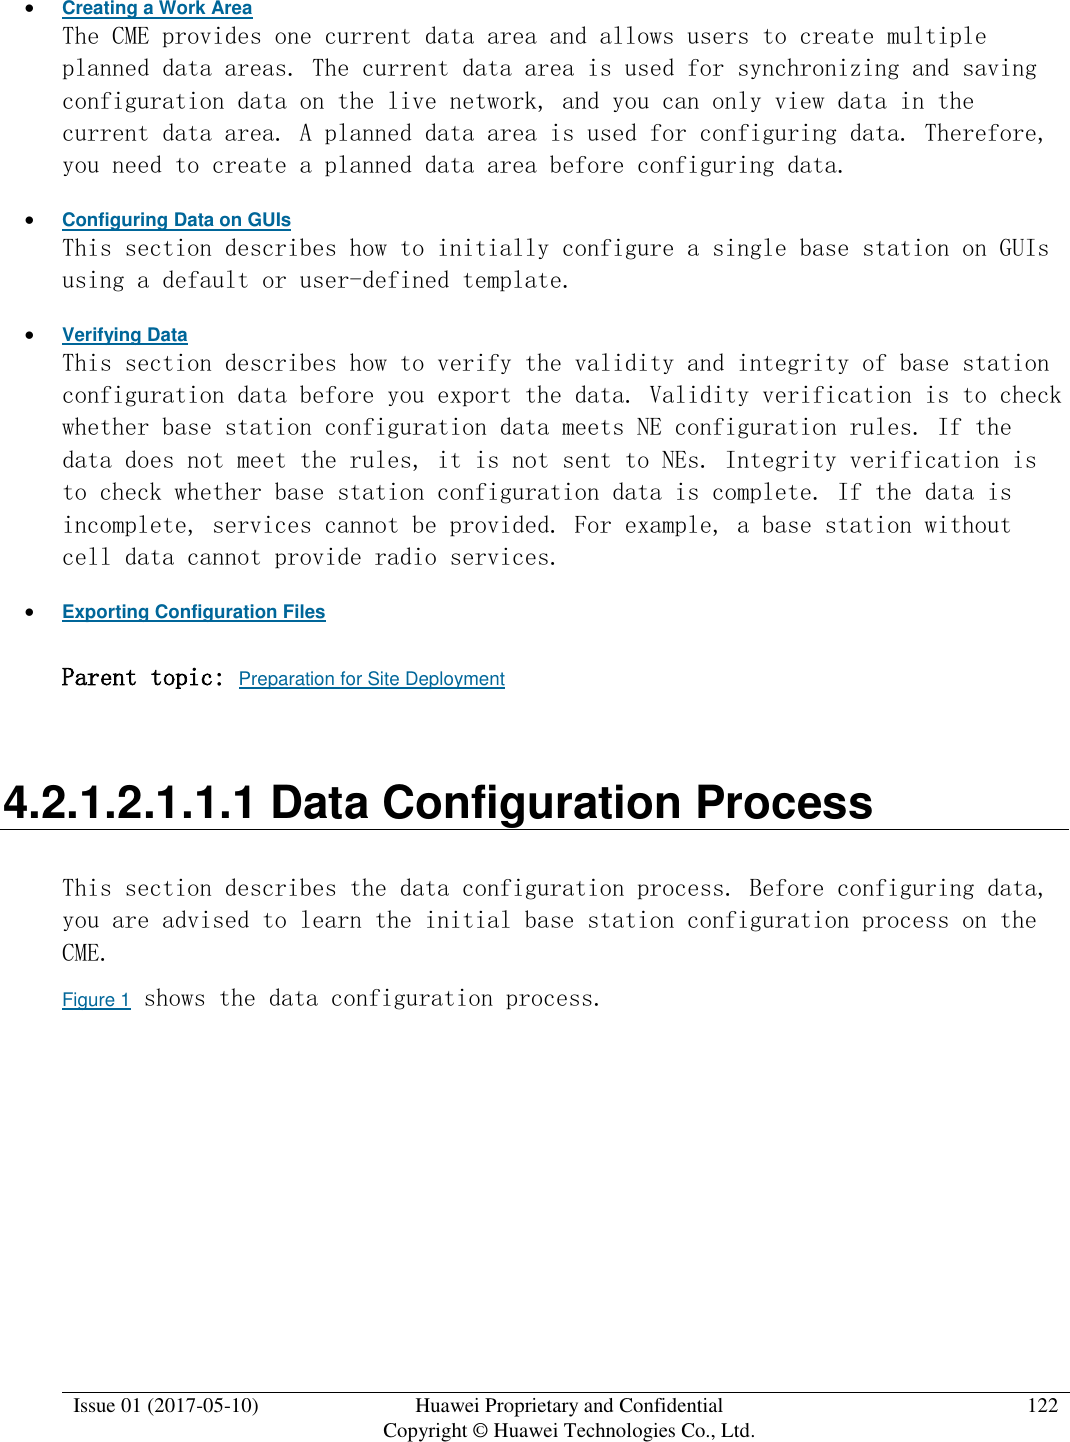  Issue 01 (2017-05-10) Huawei Proprietary and Confidential      Copyright © Huawei Technologies Co., Ltd. 122   Creating a Work Area The CME provides one current data area and allows users to create multiple planned data areas. The current data area is used for synchronizing and saving configuration data on the live network, and you can only view data in the current data area. A planned data area is used for configuring data. Therefore, you need to create a planned data area before configuring data.  Configuring Data on GUIs This section describes how to initially configure a single base station on GUIs using a default or user-defined template.   Verifying Data This section describes how to verify the validity and integrity of base station configuration data before you export the data. Validity verification is to check whether base station configuration data meets NE configuration rules. If the data does not meet the rules, it is not sent to NEs. Integrity verification is to check whether base station configuration data is complete. If the data is incomplete, services cannot be provided. For example, a base station without cell data cannot provide radio services.   Exporting Configuration Files Parent topic: Preparation for Site Deployment 4.2.1.2.1.1.1 Data Configuration Process This section describes the data configuration process. Before configuring data, you are advised to learn the initial base station configuration process on the CME. Figure 1 shows the data configuration process. 